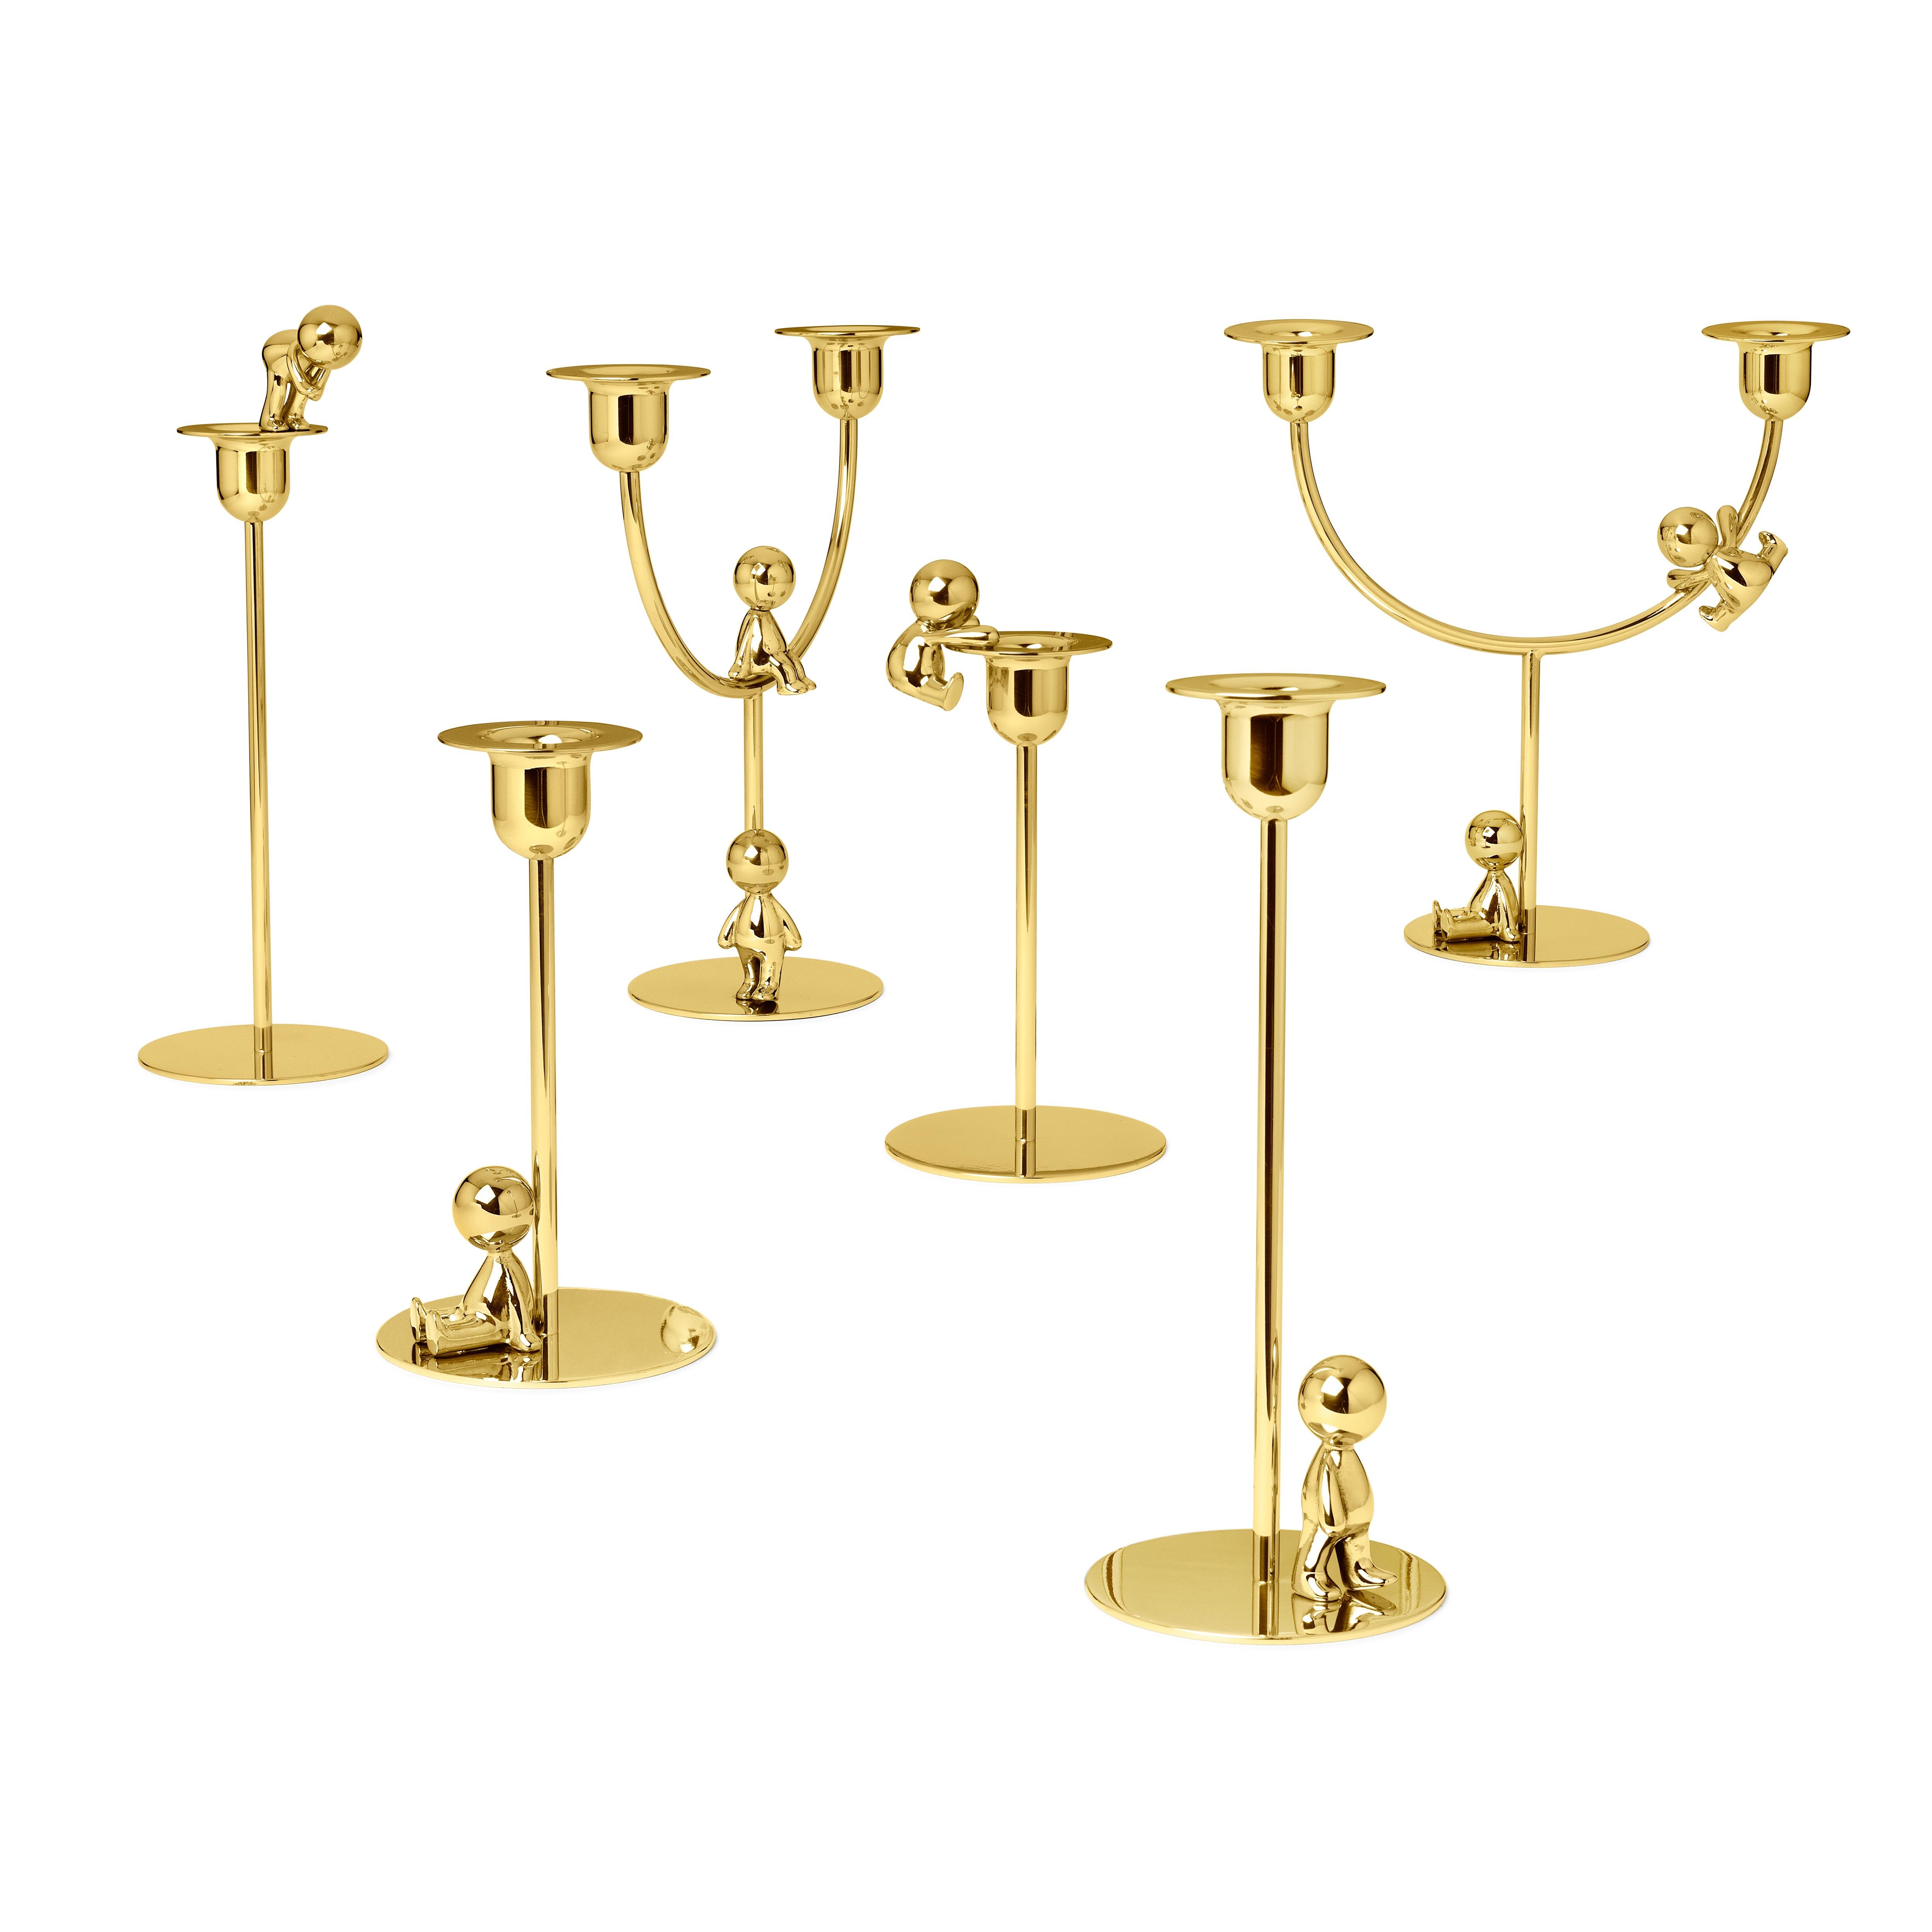 Italian Ghidini 1961 Omini the Lazy Climber Candlestick in Brass by Stefano Giovannoni For Sale